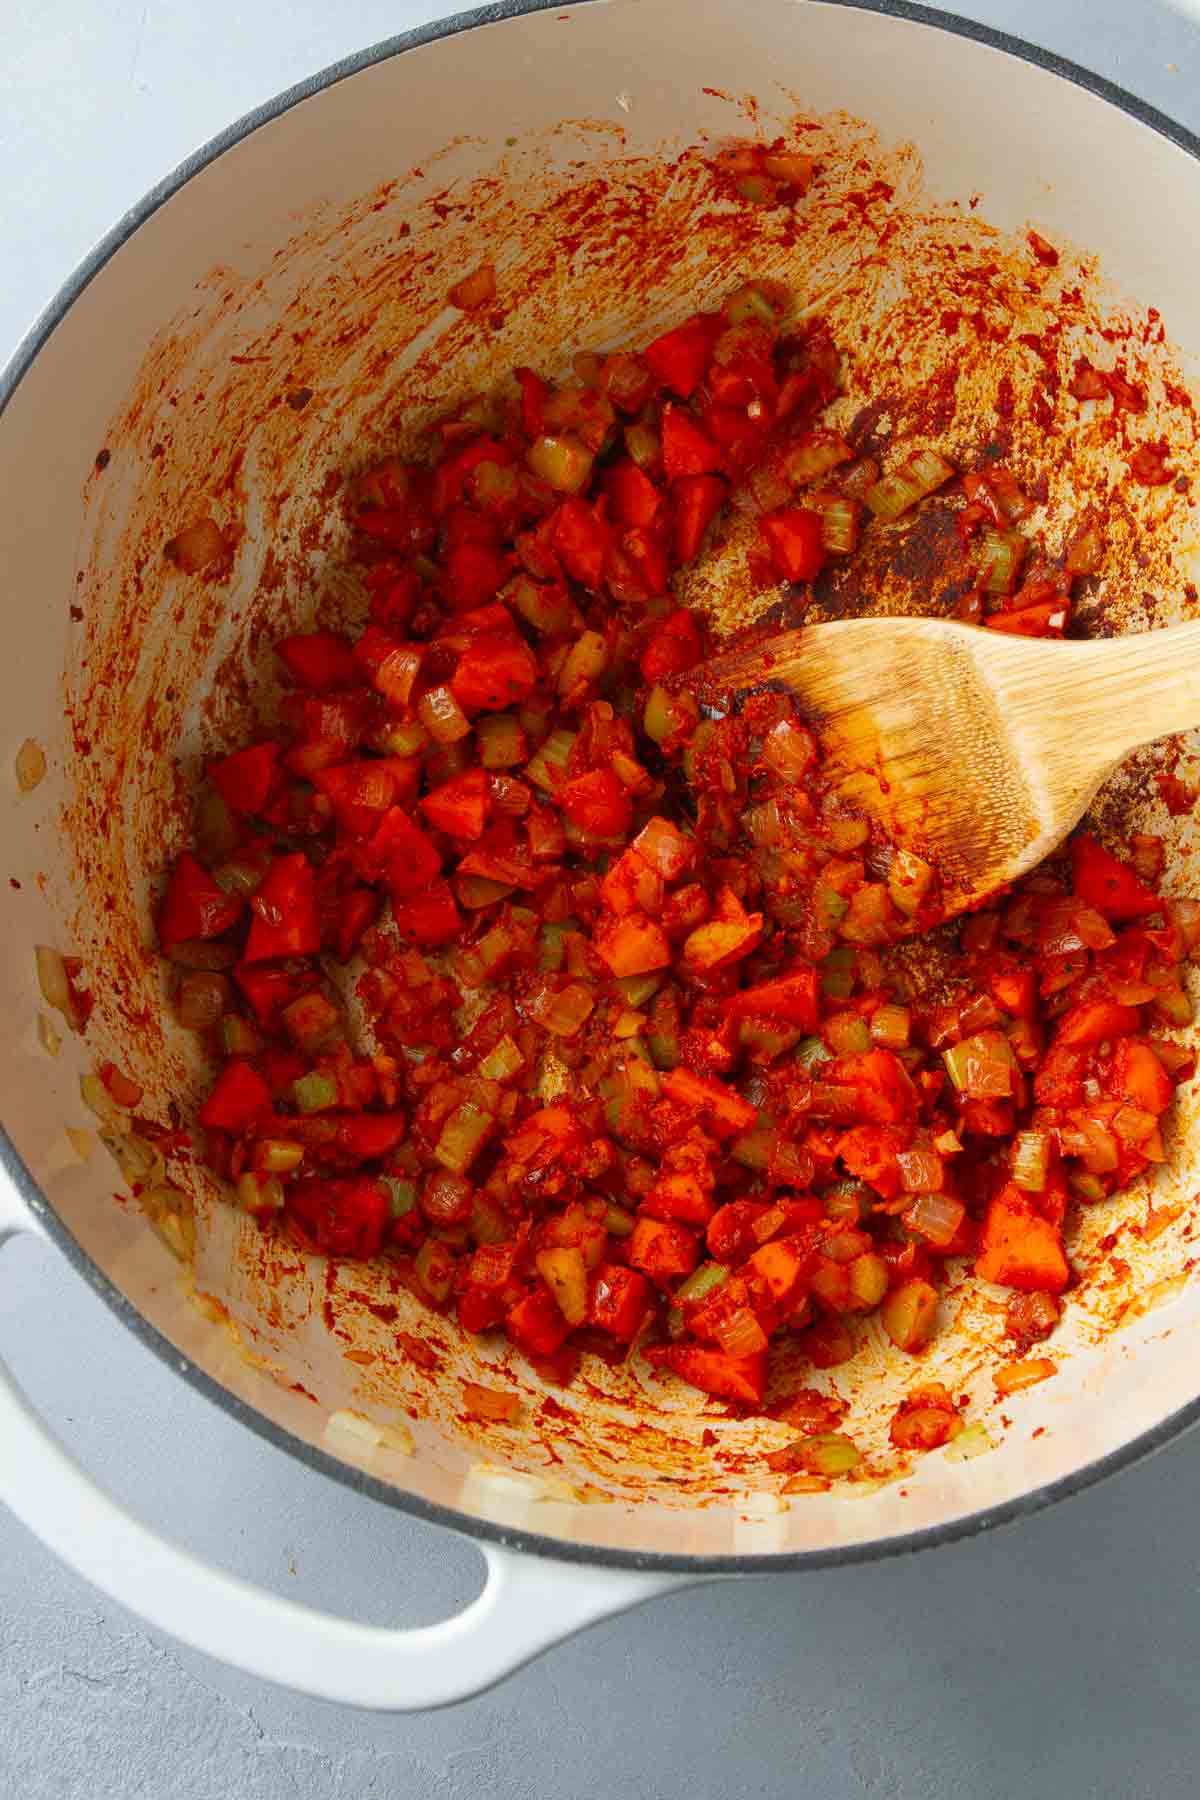 Chopped vegetables coated with tomato paste in a saucepan with a wooden spatula.